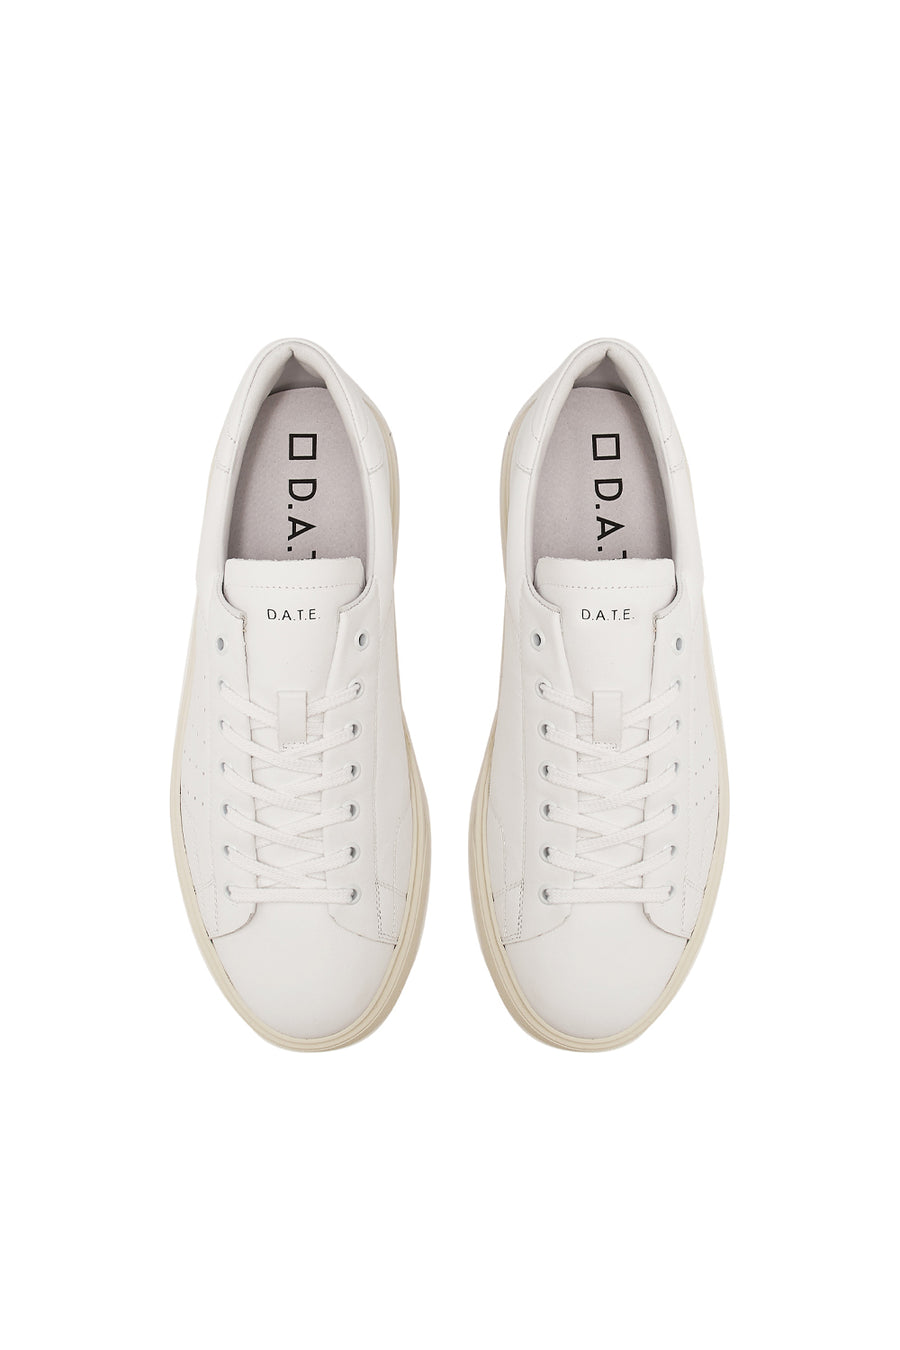 Buy the D.A.T.E. Levante Calf Sneaker in White at Intro. Spend £50 for free UK delivery. Official stockists. We ship worldwide.